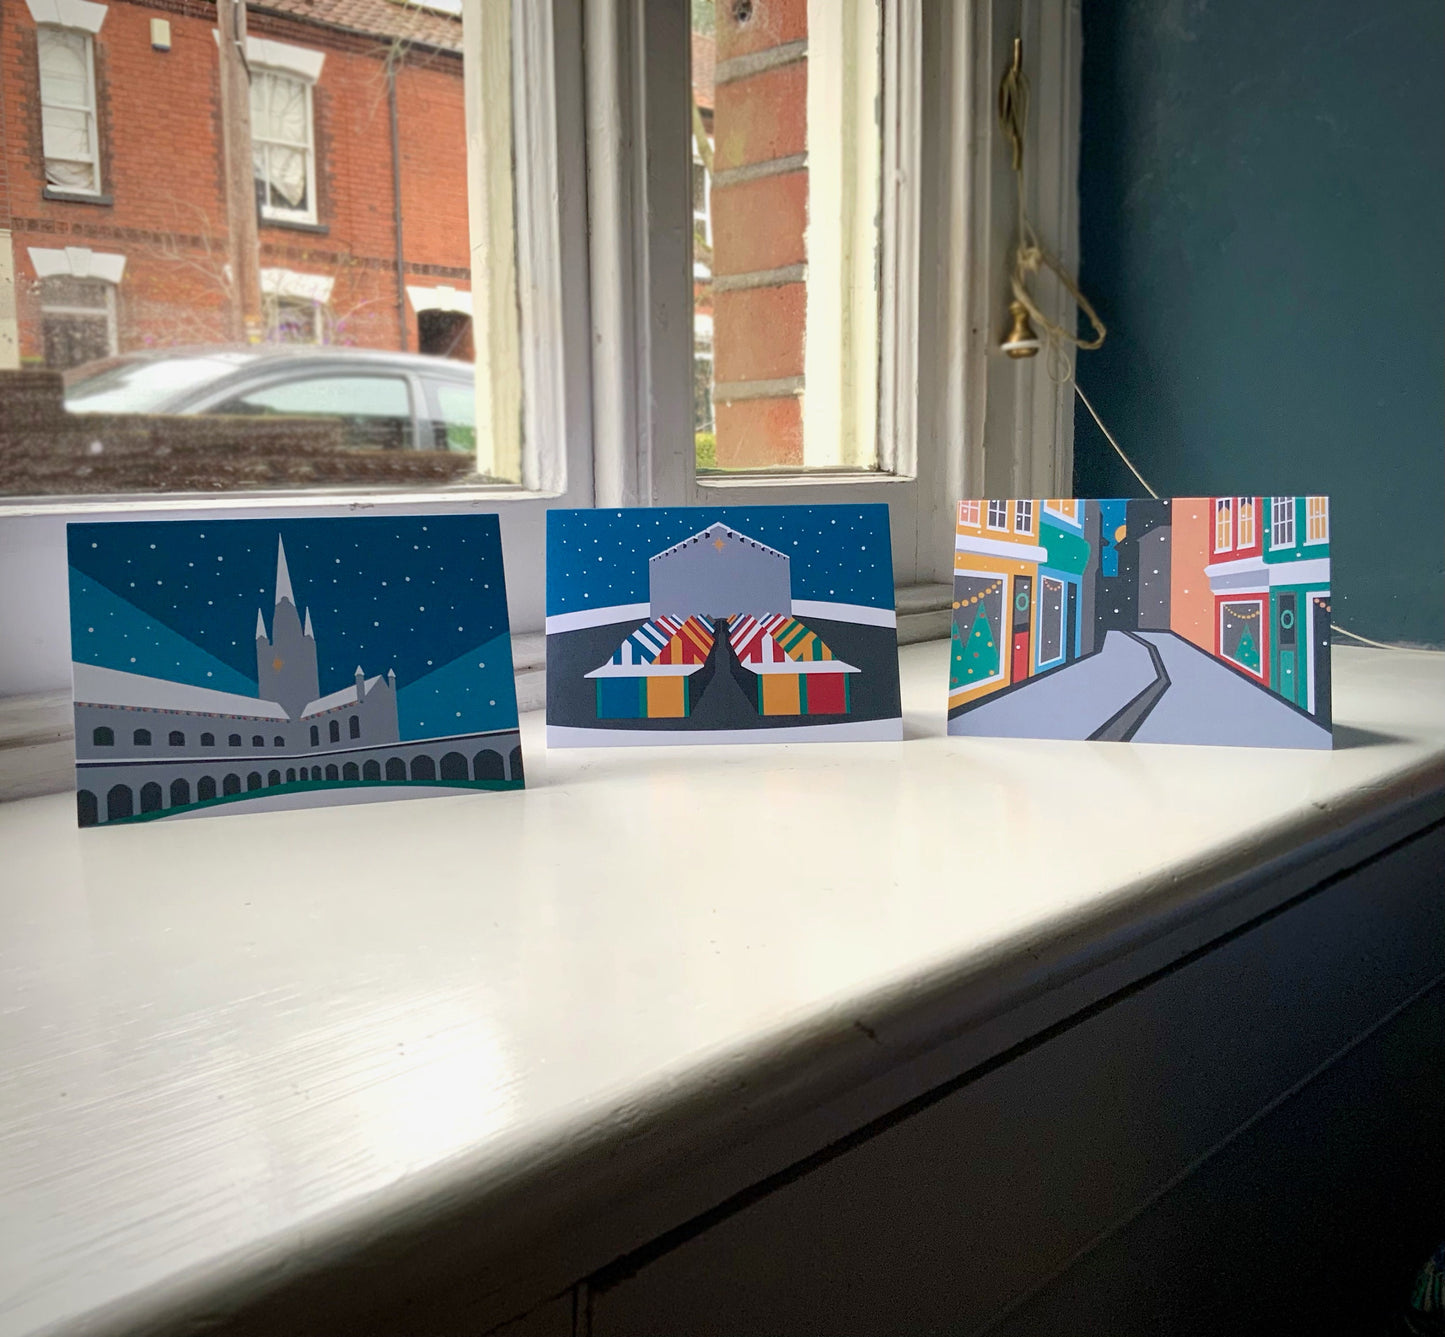 NORWICH THEMED CHRISTMAS Cards